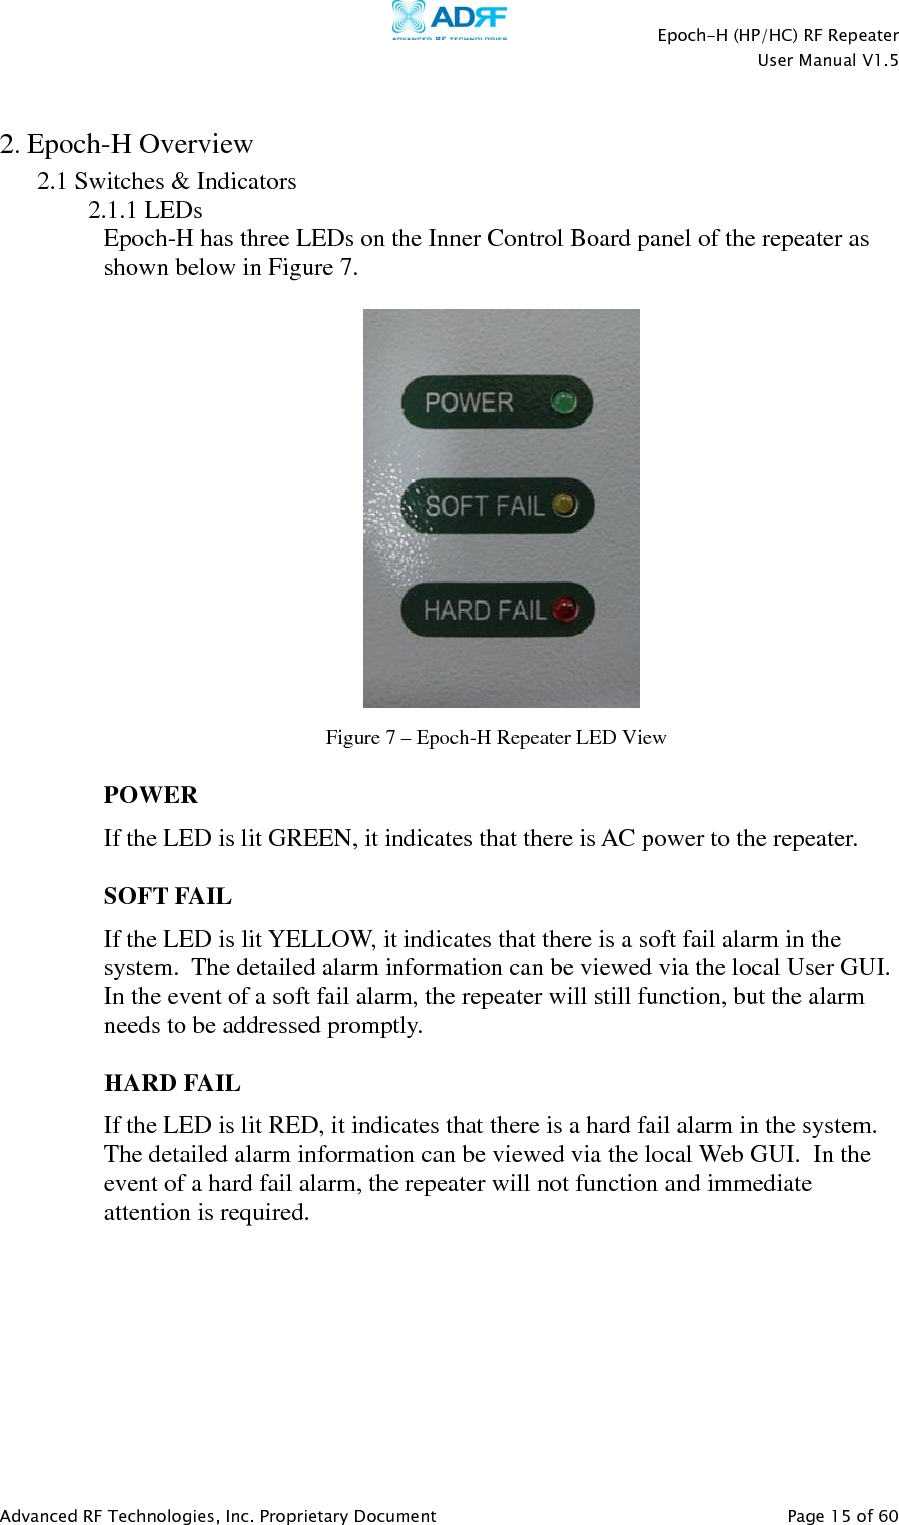    Epoch-H (HP/HC) RF Repeater  User Manual V1.5  Advanced RF Technologies, Inc. Proprietary Document   Page 15 of 60   2. Epoch-H Overview 2.1 Switches &amp; Indicators 2.1.1 LEDs  Epoch-H has three LEDs on the Inner Control Board panel of the repeater as shown below in Figure 7.      POWER If the LED is lit GREEN, it indicates that there is AC power to the repeater.   SOFT FAIL If the LED is lit YELLOW, it indicates that there is a soft fail alarm in the system.  The detailed alarm information can be viewed via the local User GUI.  In the event of a soft fail alarm, the repeater will still function, but the alarm needs to be addressed promptly.  HARD FAIL If the LED is lit RED, it indicates that there is a hard fail alarm in the system.  The detailed alarm information can be viewed via the local Web GUI.  In the event of a hard fail alarm, the repeater will not function and immediate attention is required.  Figure 7 – Epoch-H Repeater LED View 